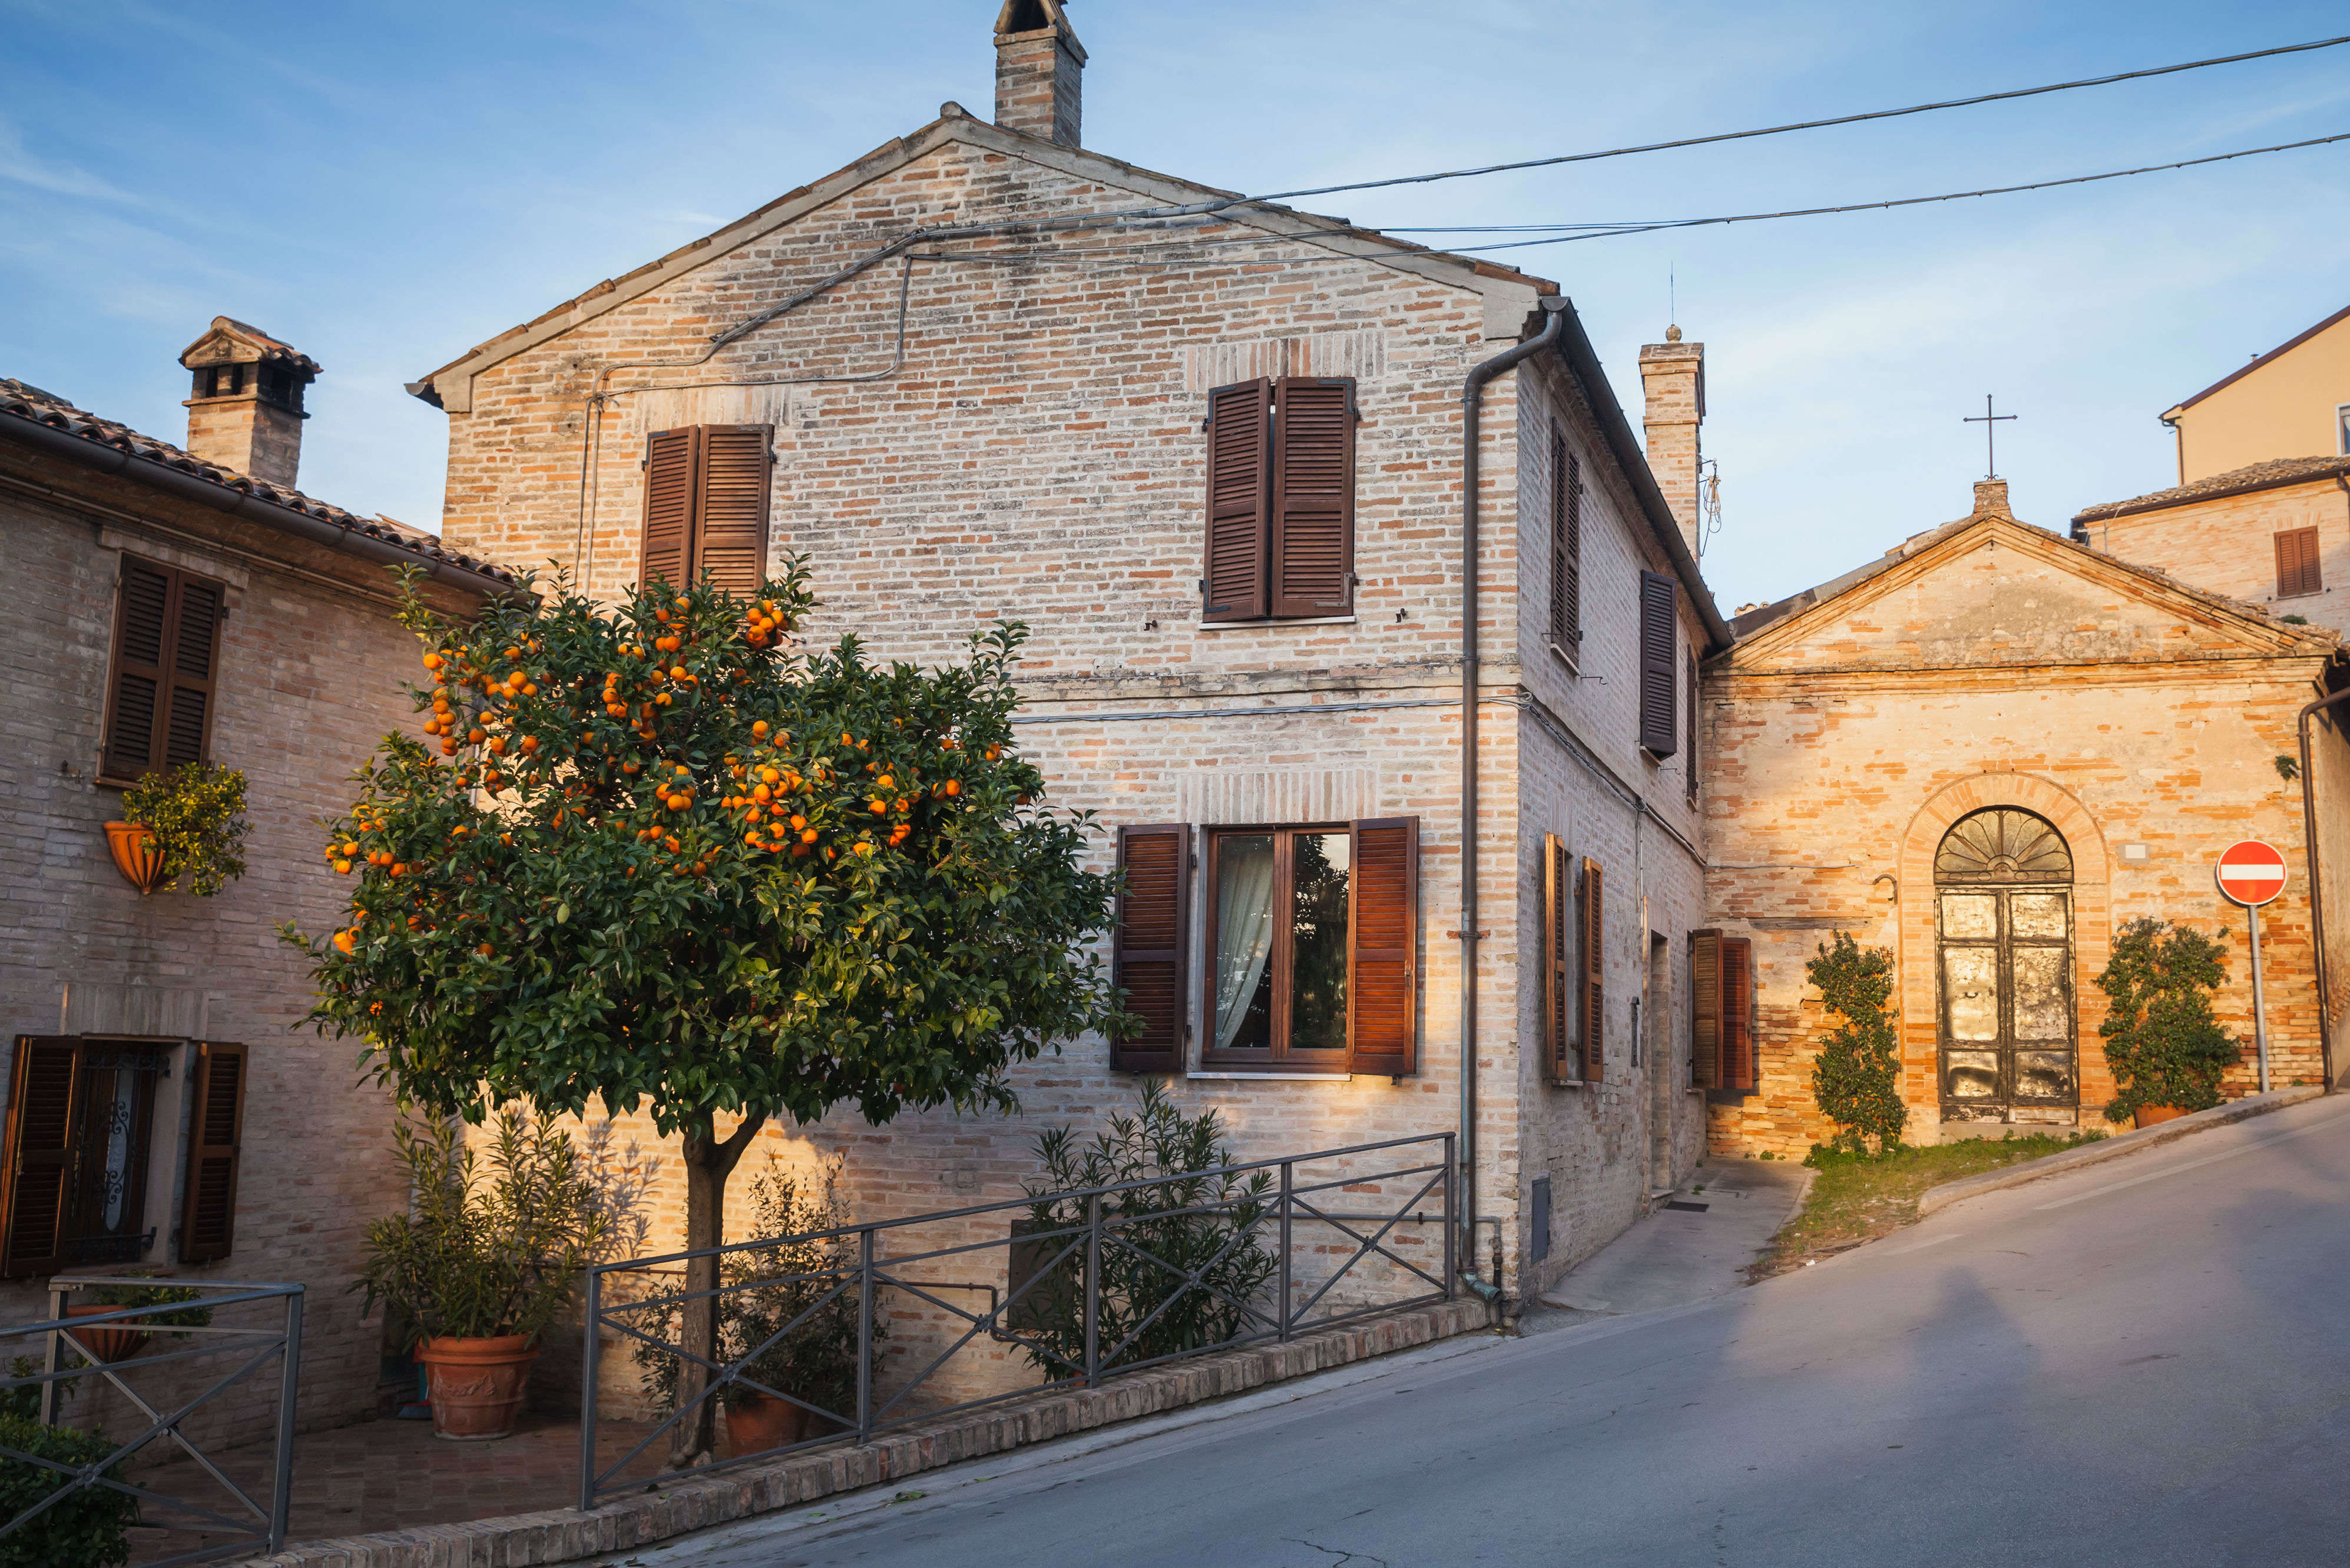 Buying a one dollar home in rural Italy – what’s the deal?